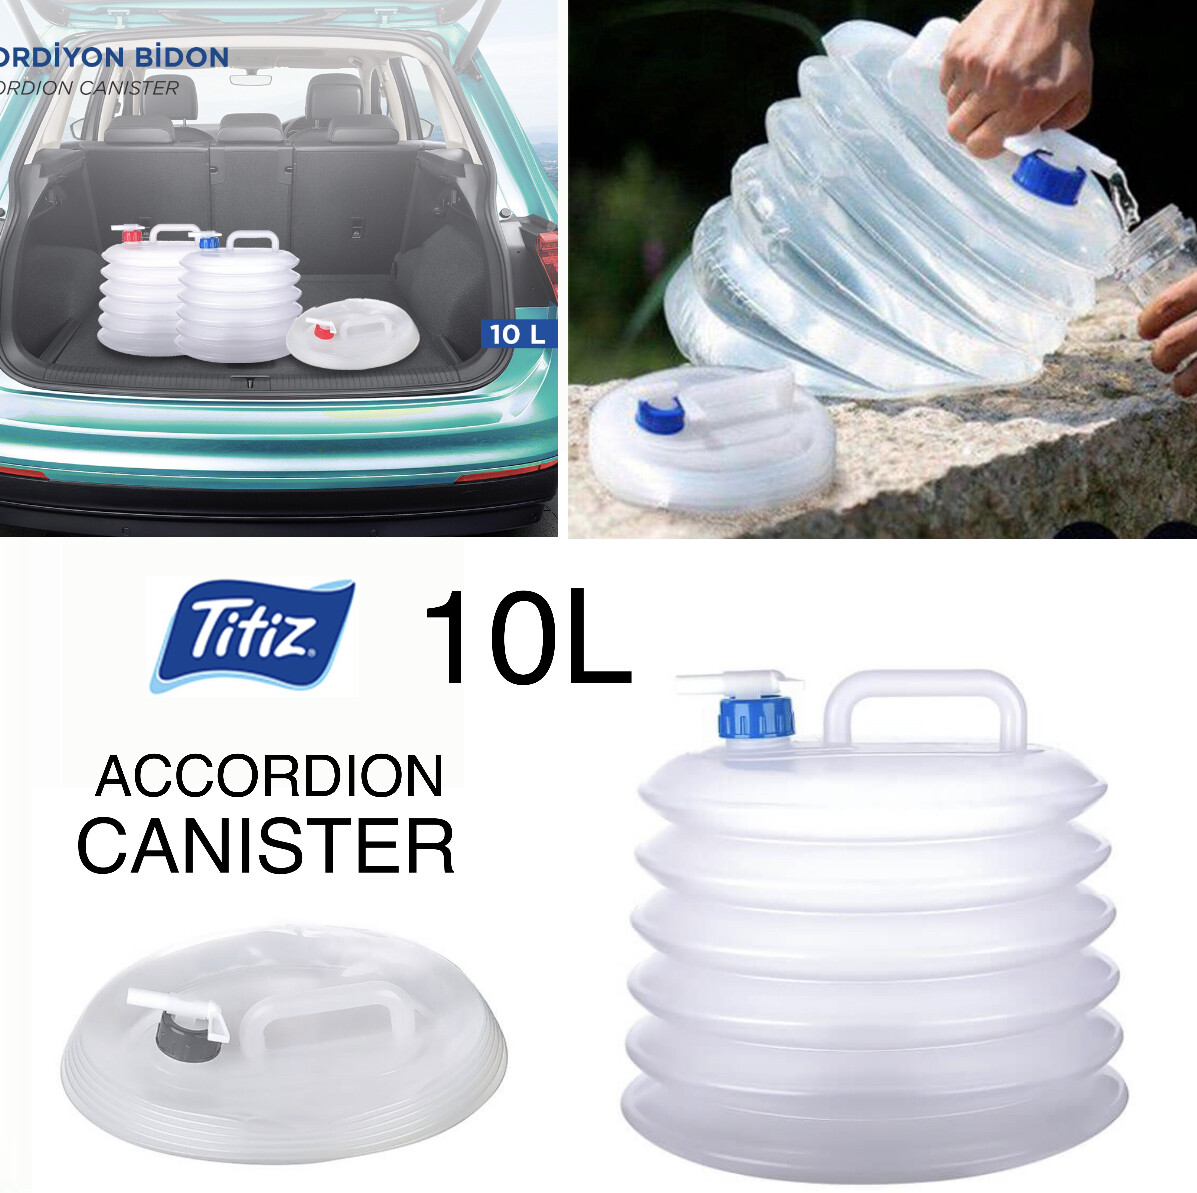 10L Accordion Canister